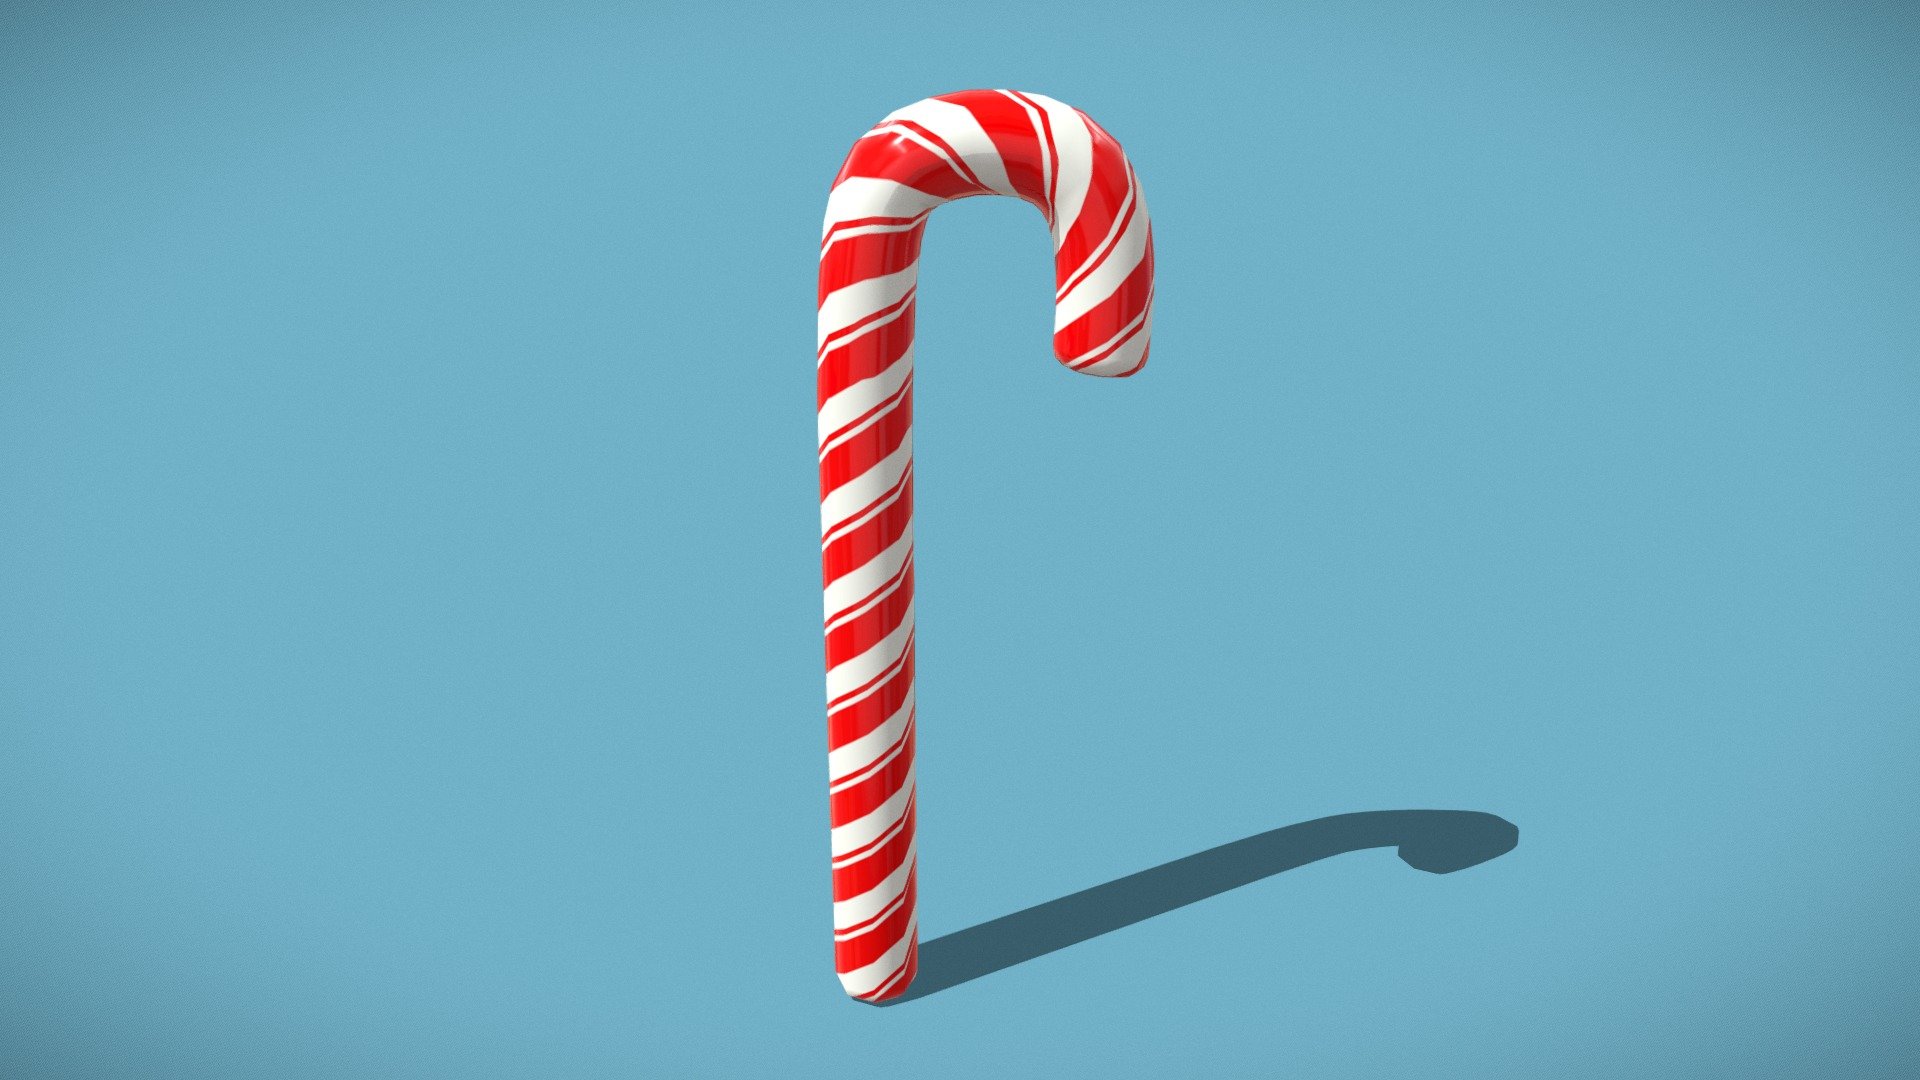 Candy_Cane_FBX
VR / AR / Low-poly
PBR approved
Geometry Polygon mesh
Polygons 194
Vertices 200
Textures 4K PNG - Candy Cane - Buy Royalty Free 3D model by GetDeadEntertainment 3d model